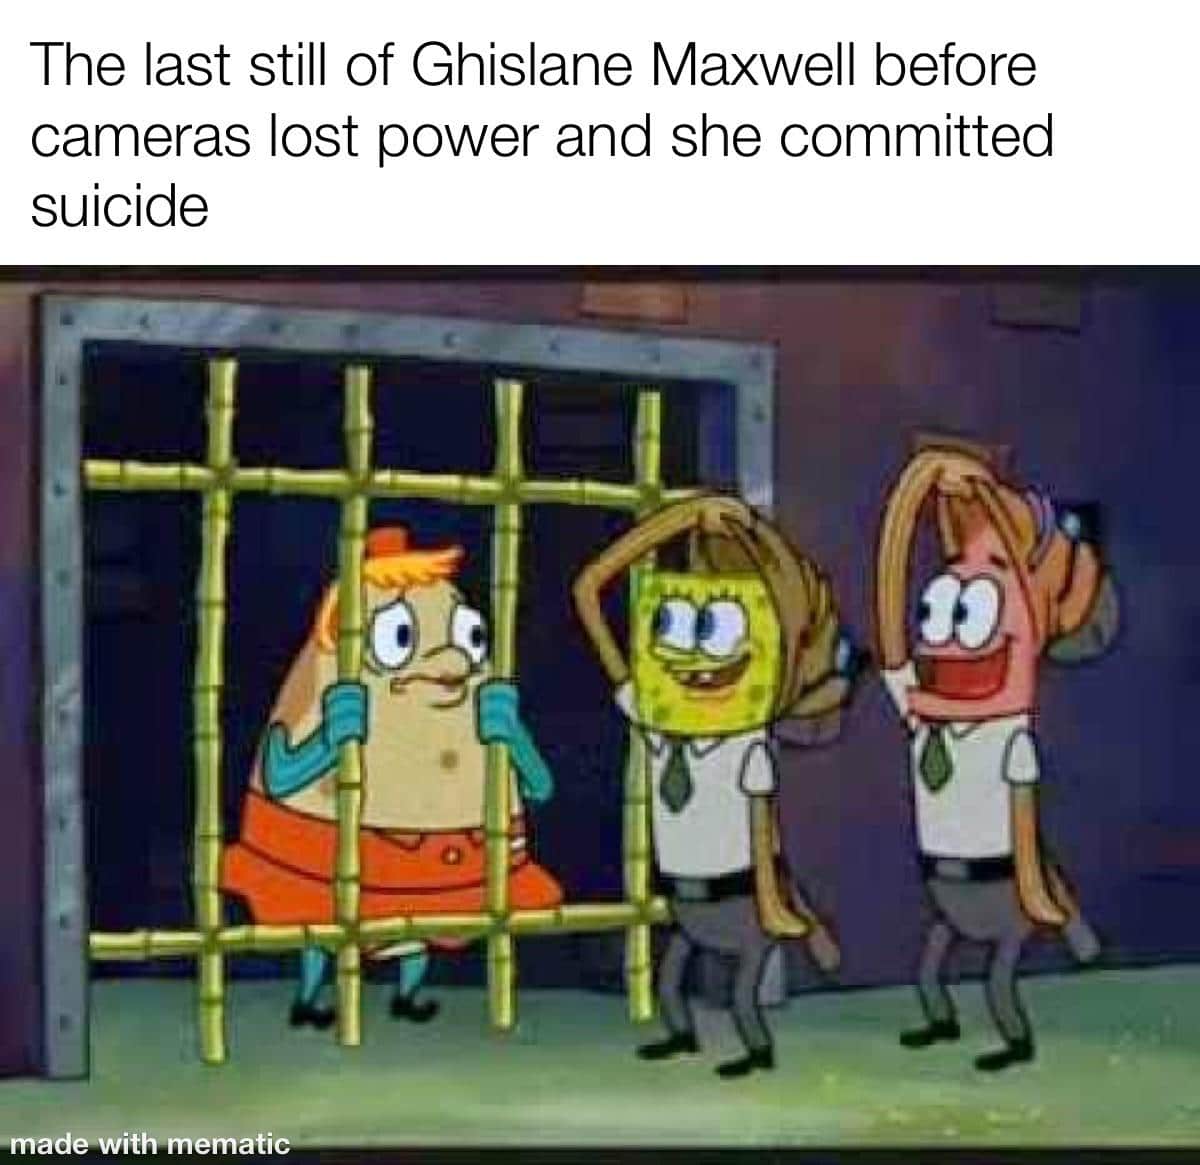 Spongebob, Epstein, COVID, Patrick, Neptune, Maxwell Spongebob Memes Spongebob, Epstein, COVID, Patrick, Neptune, Maxwell text: The last still of Ghislane Maxwell before cameras lost power and she committed suicide 